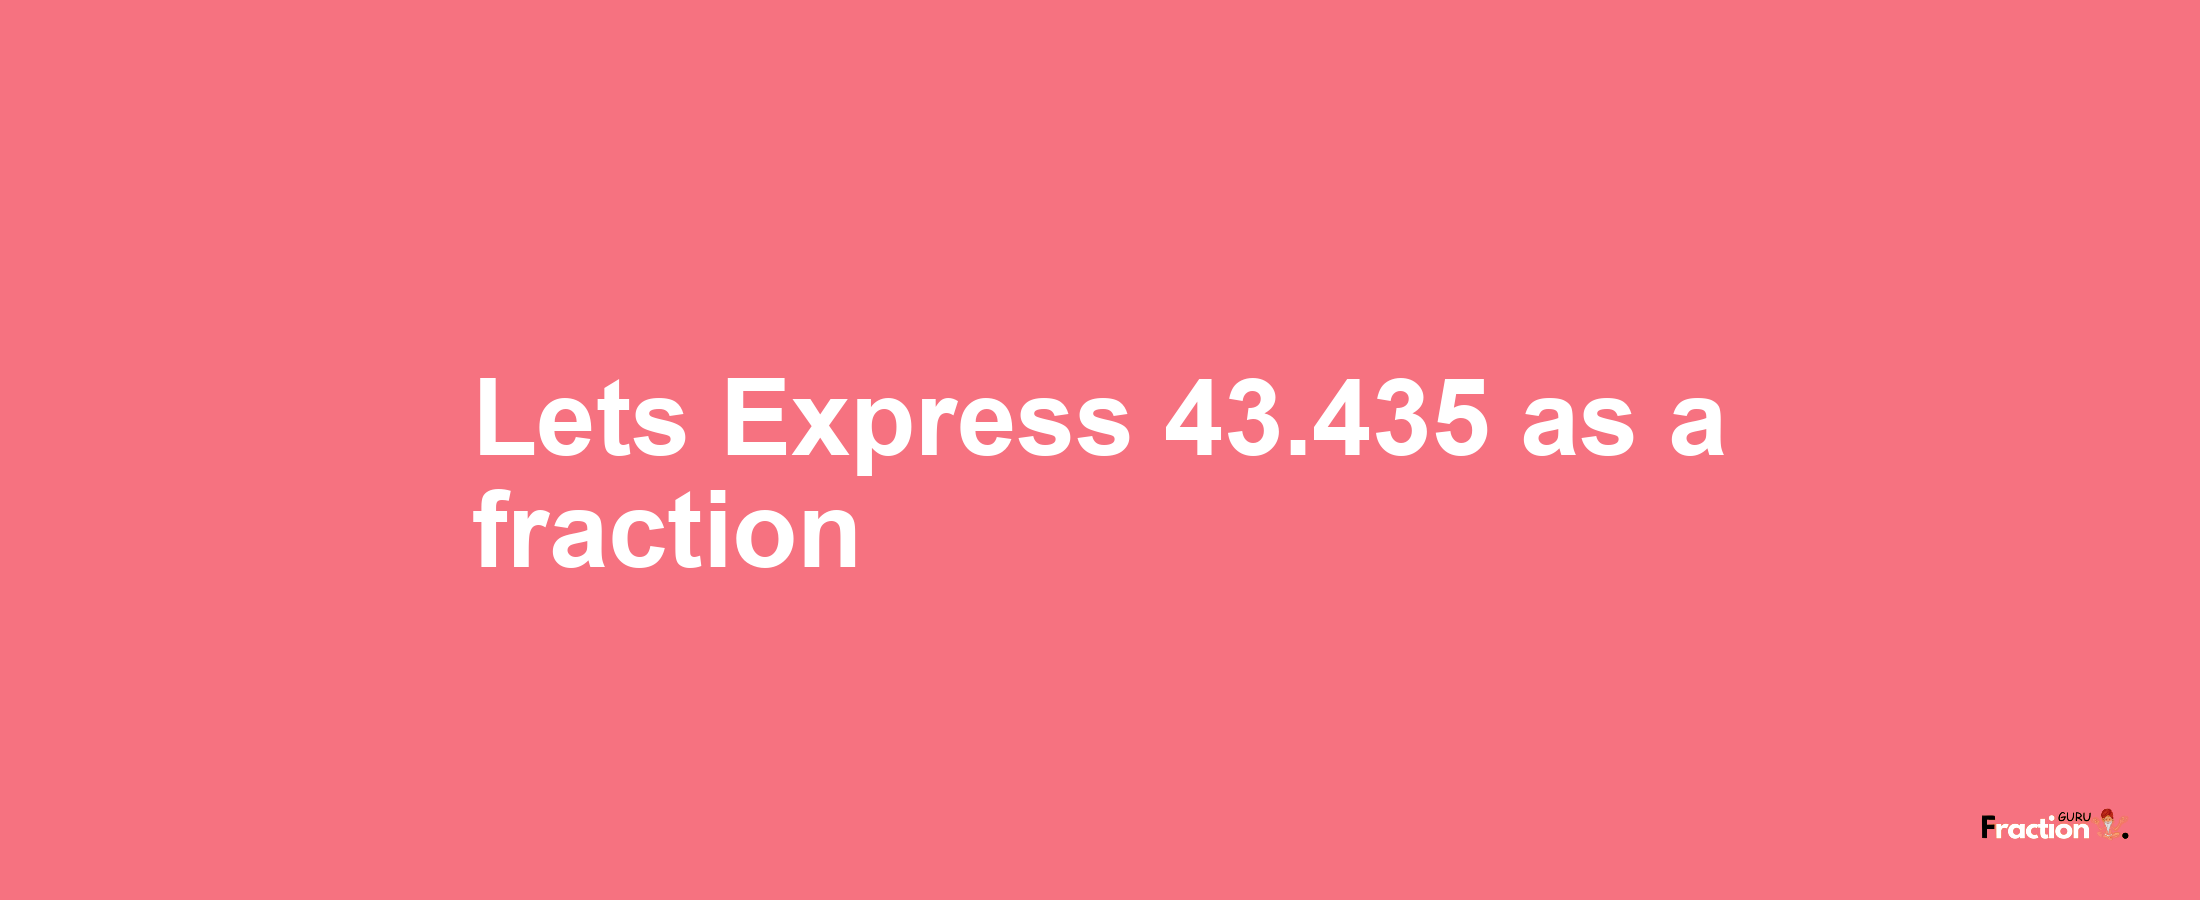 Lets Express 43.435 as afraction